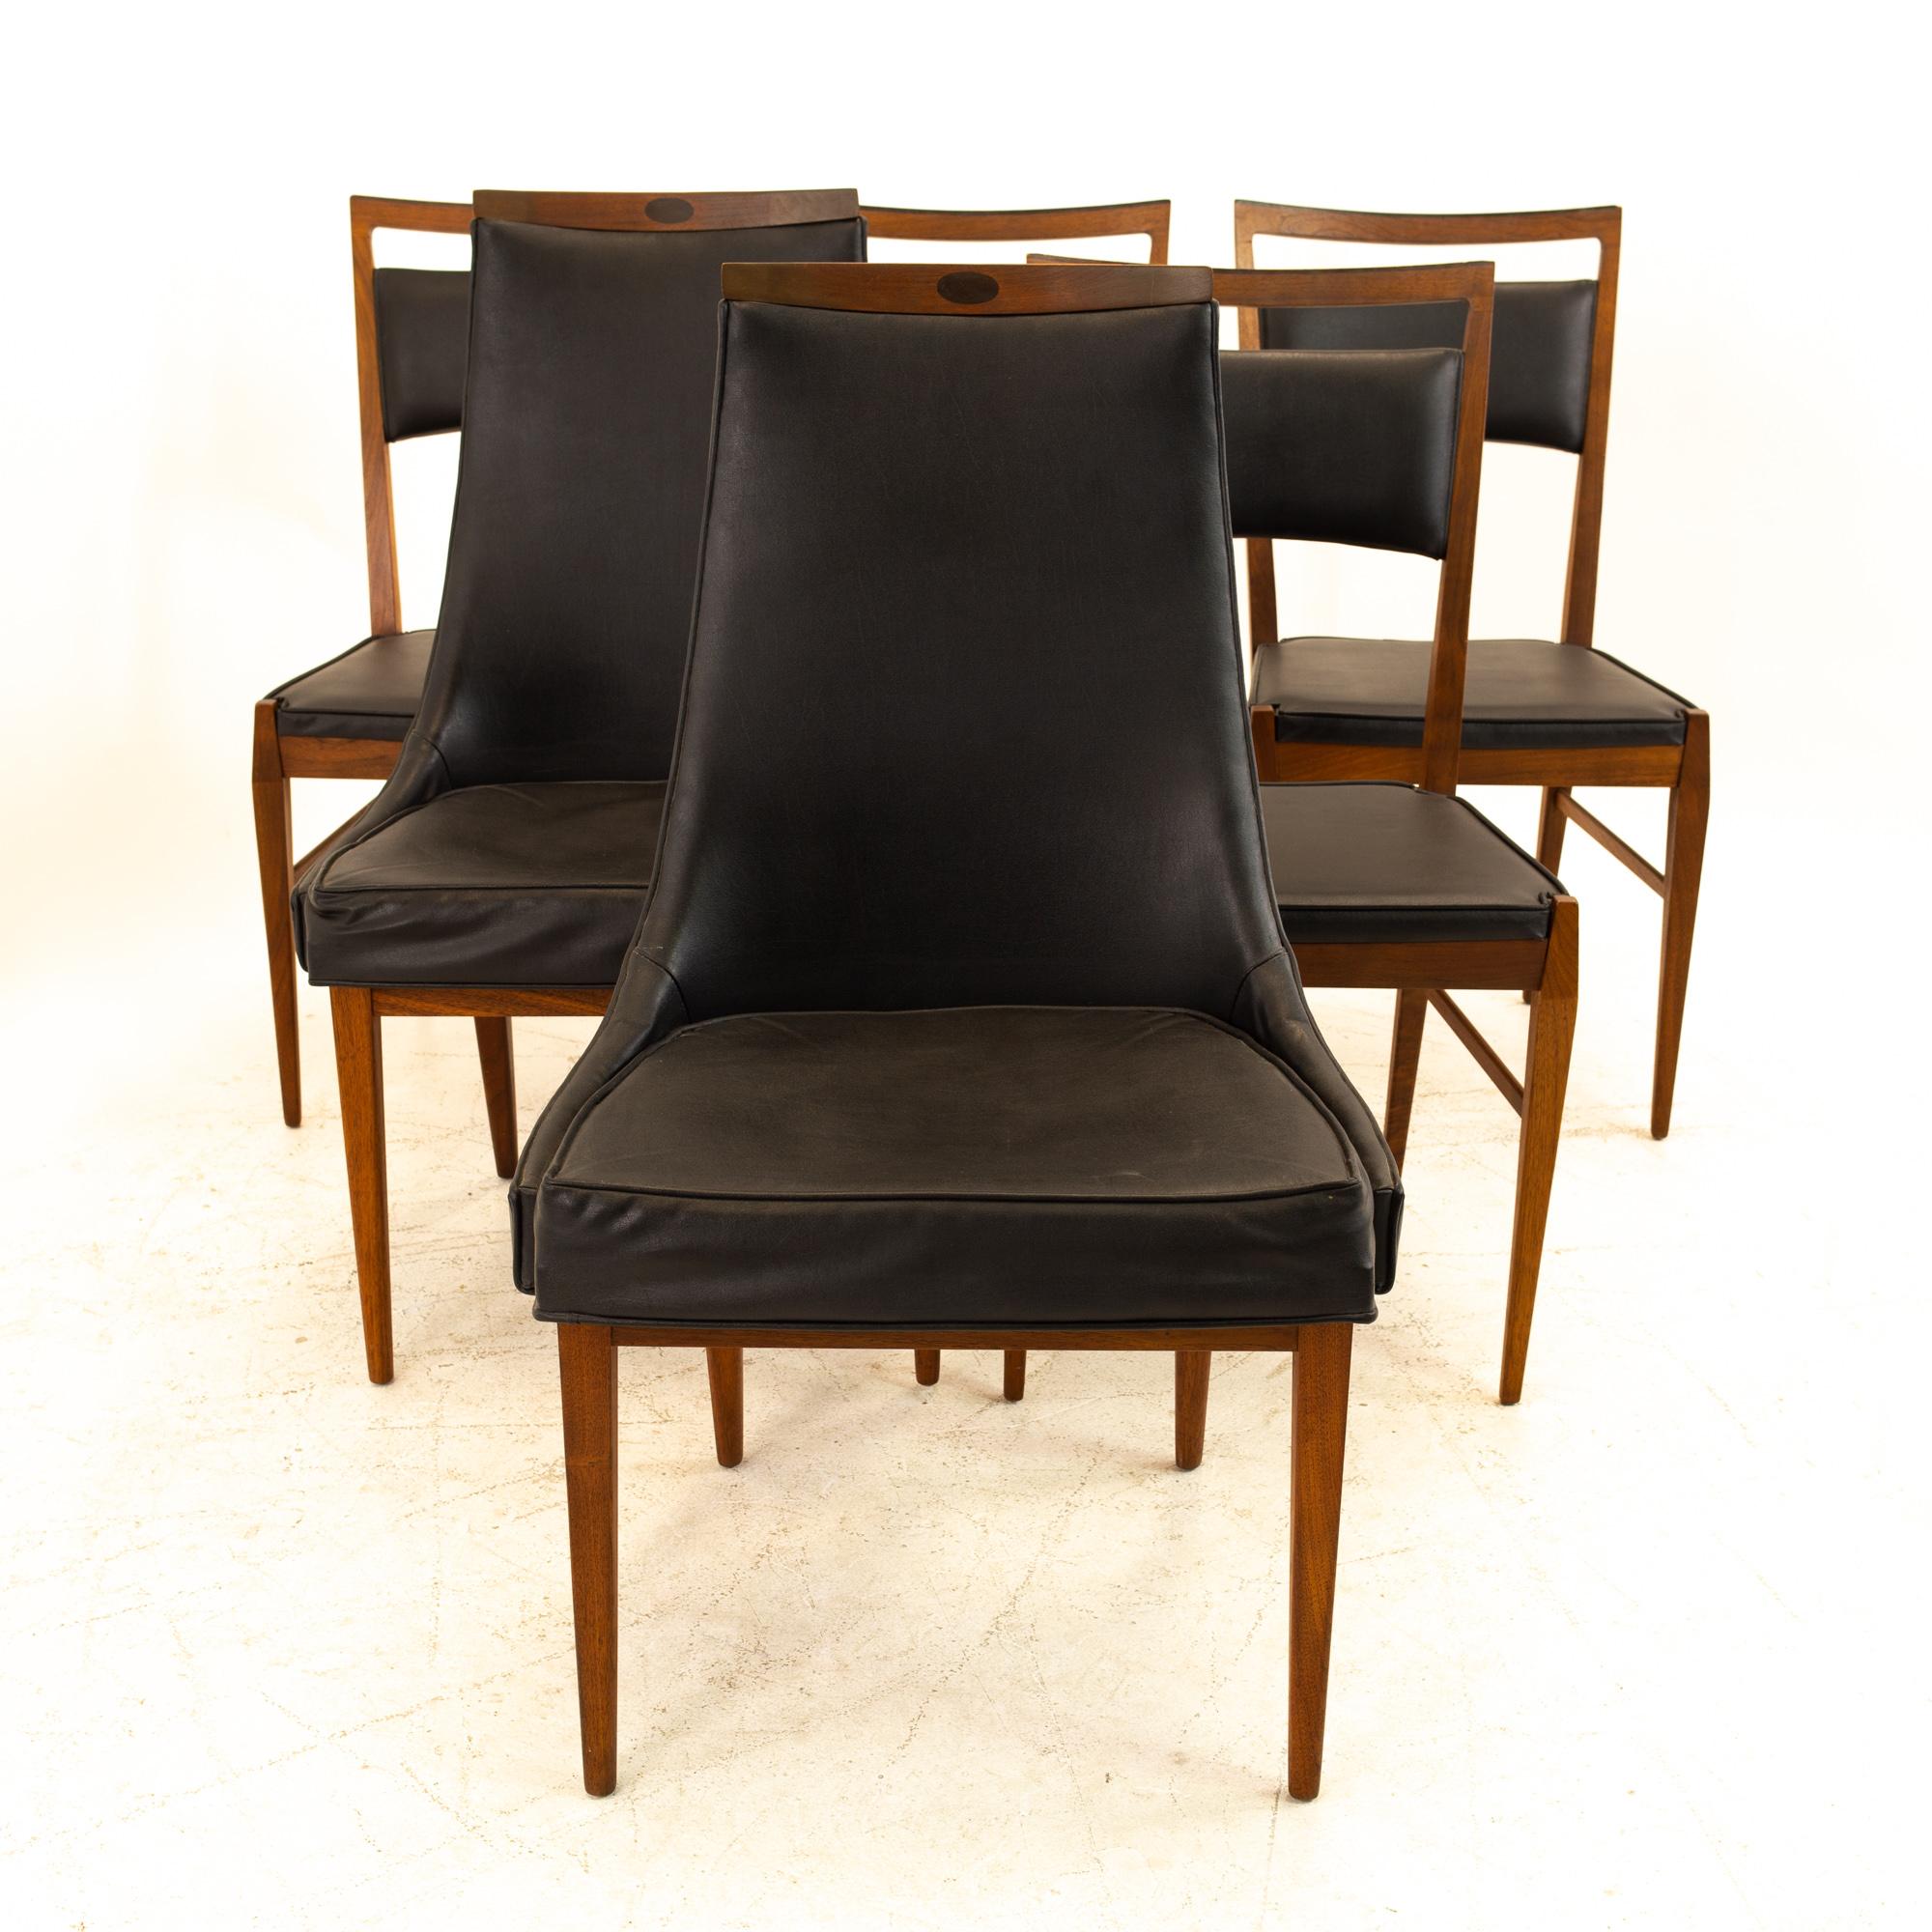 Kipp Stewart for Calvin mid century dining chairs - Set of 6

Each chair measures: 21 wide x 18 deep x 35 high, with a seat height of 19 inches

All pieces of furniture can be had in what we call restored vintage condition. That means the piece is